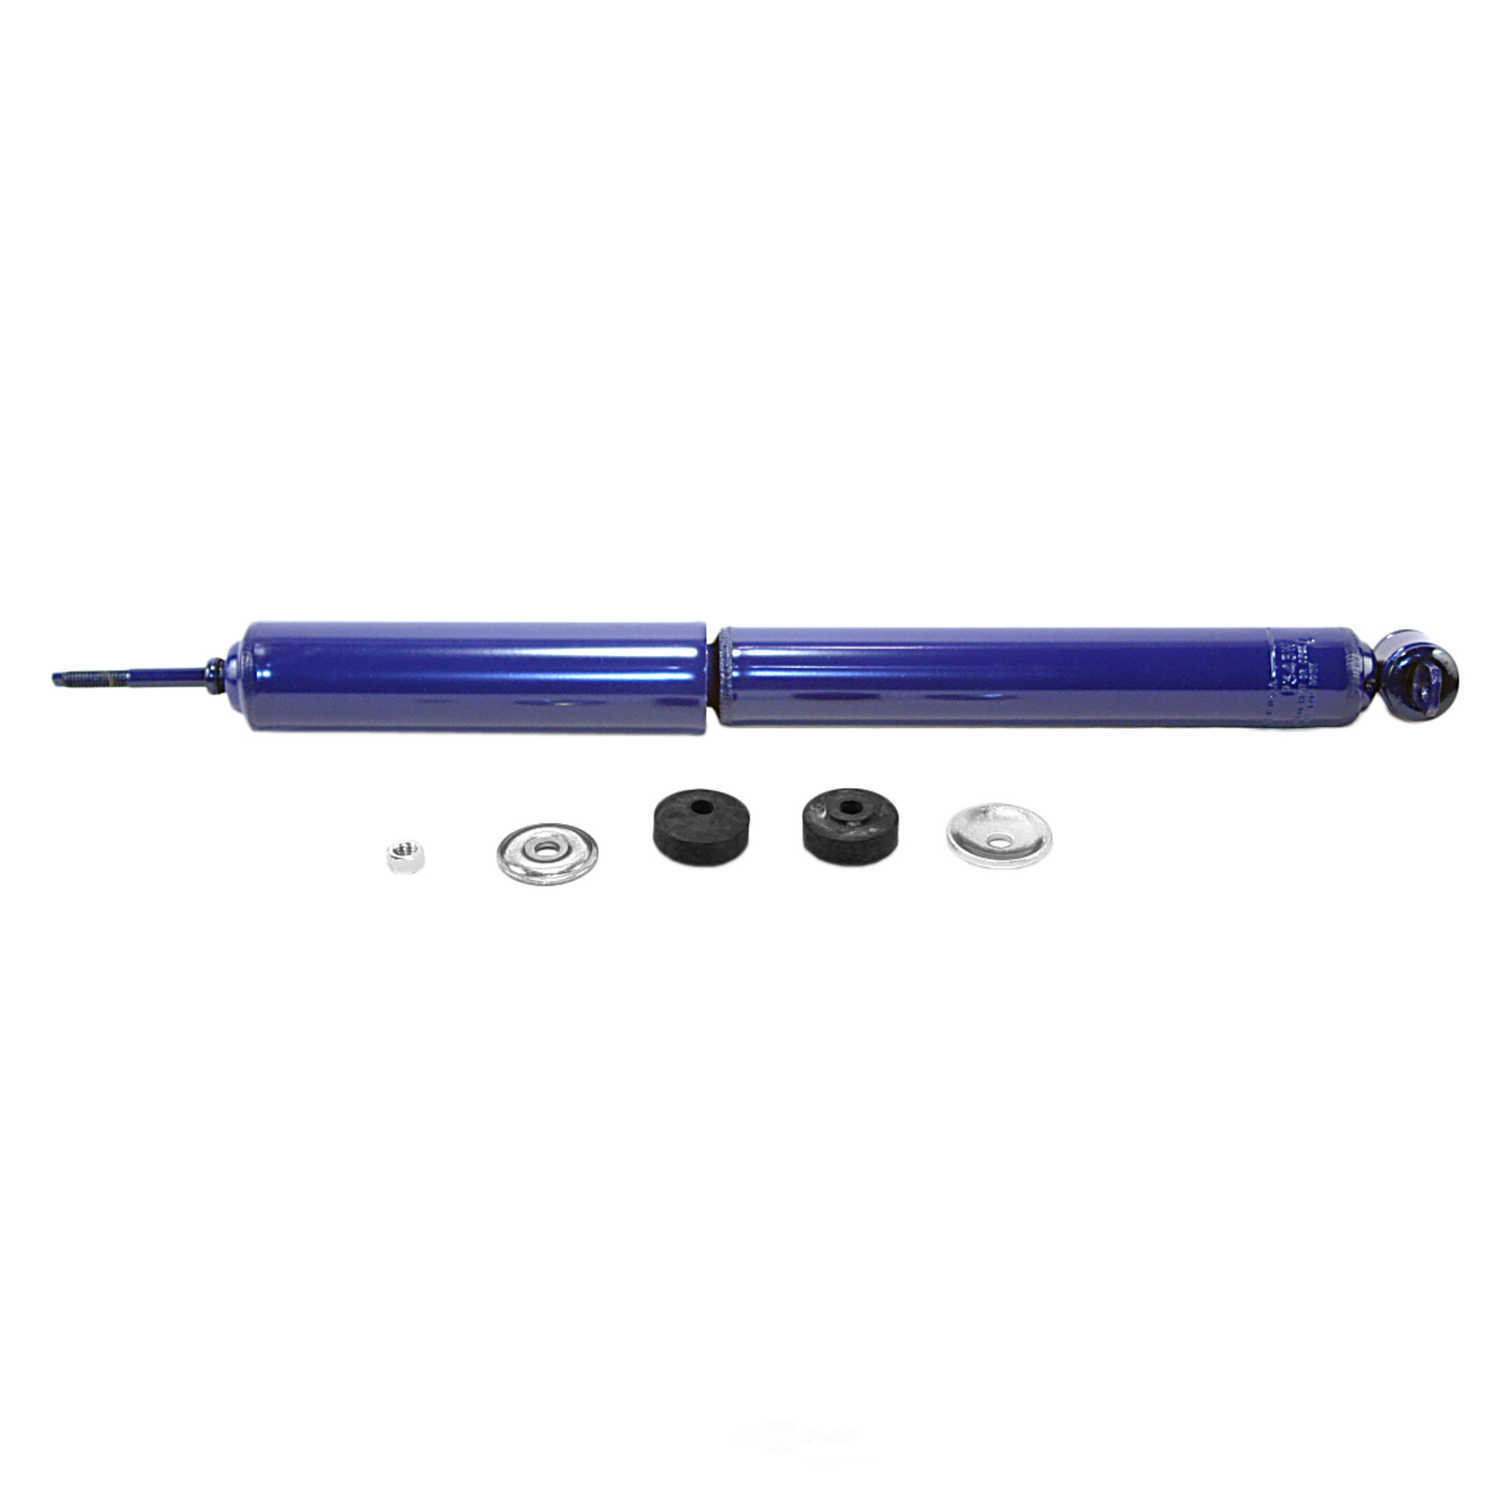 MONROE SHOCKS/STRUTS - Monro-Matic Plus Shock Absorber (With ABS Brakes, Front) - MOE 32252